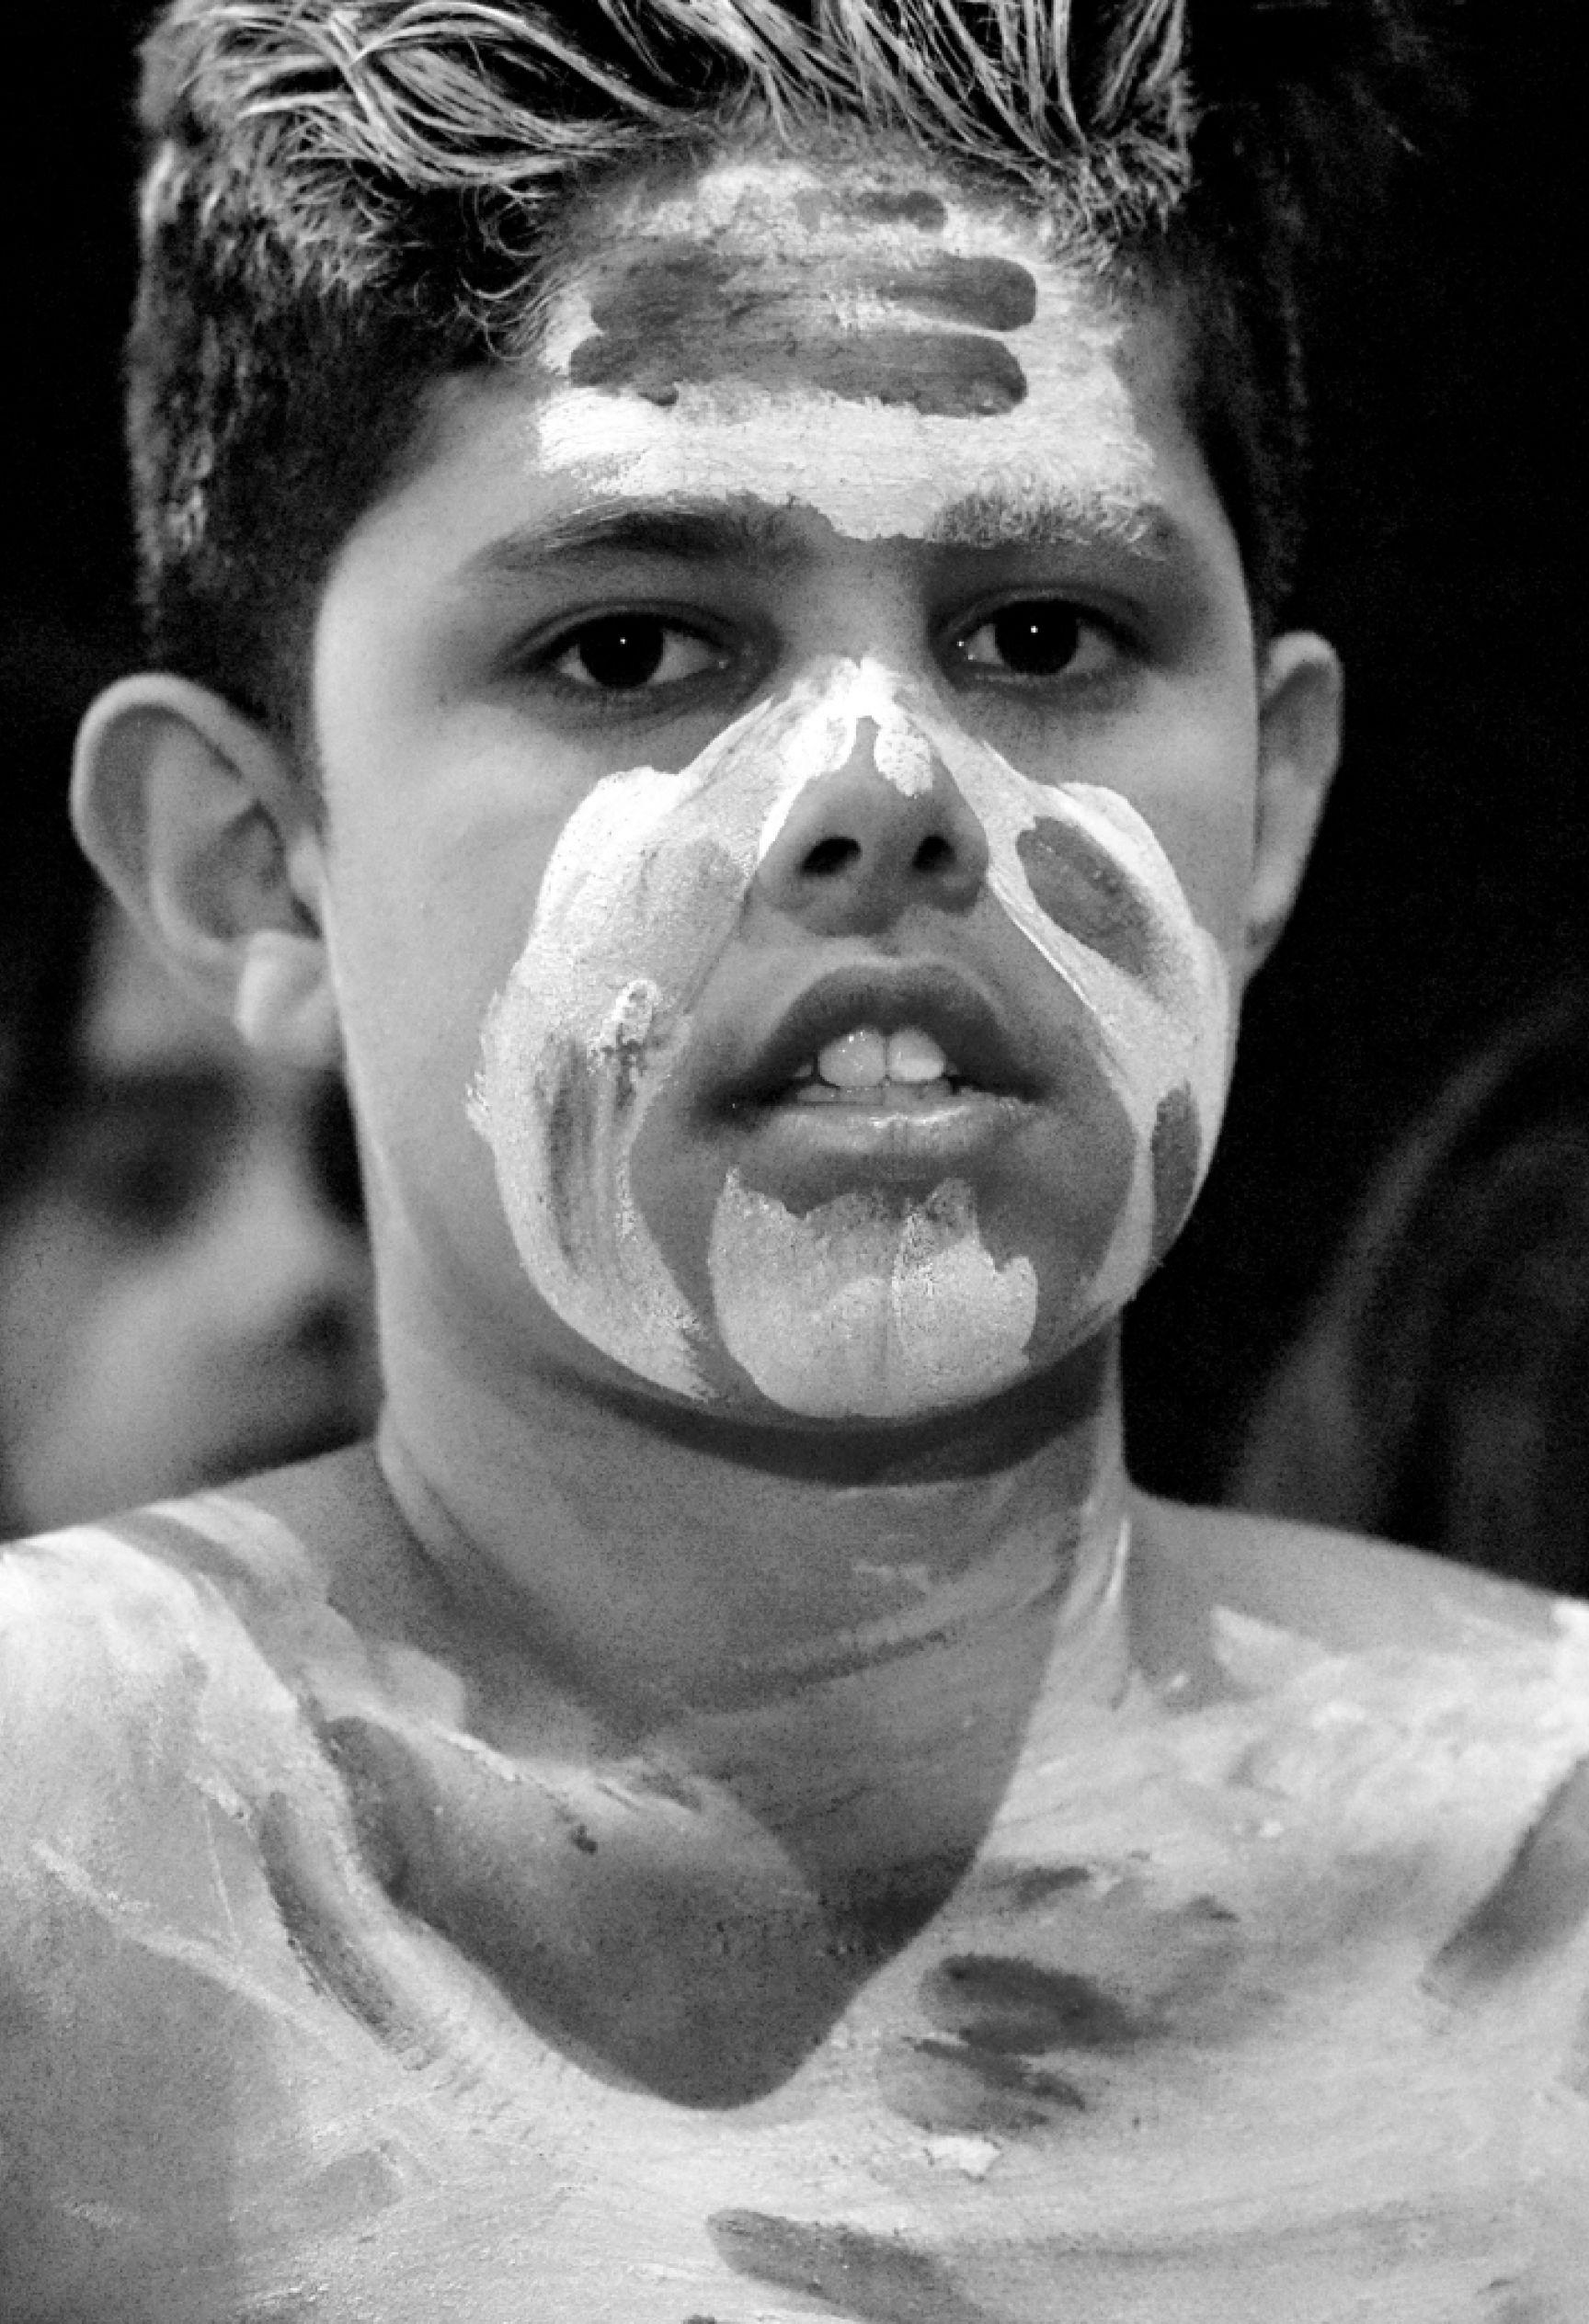 A black and white photo of a young indigenous boy wearing traditional face and body paint.